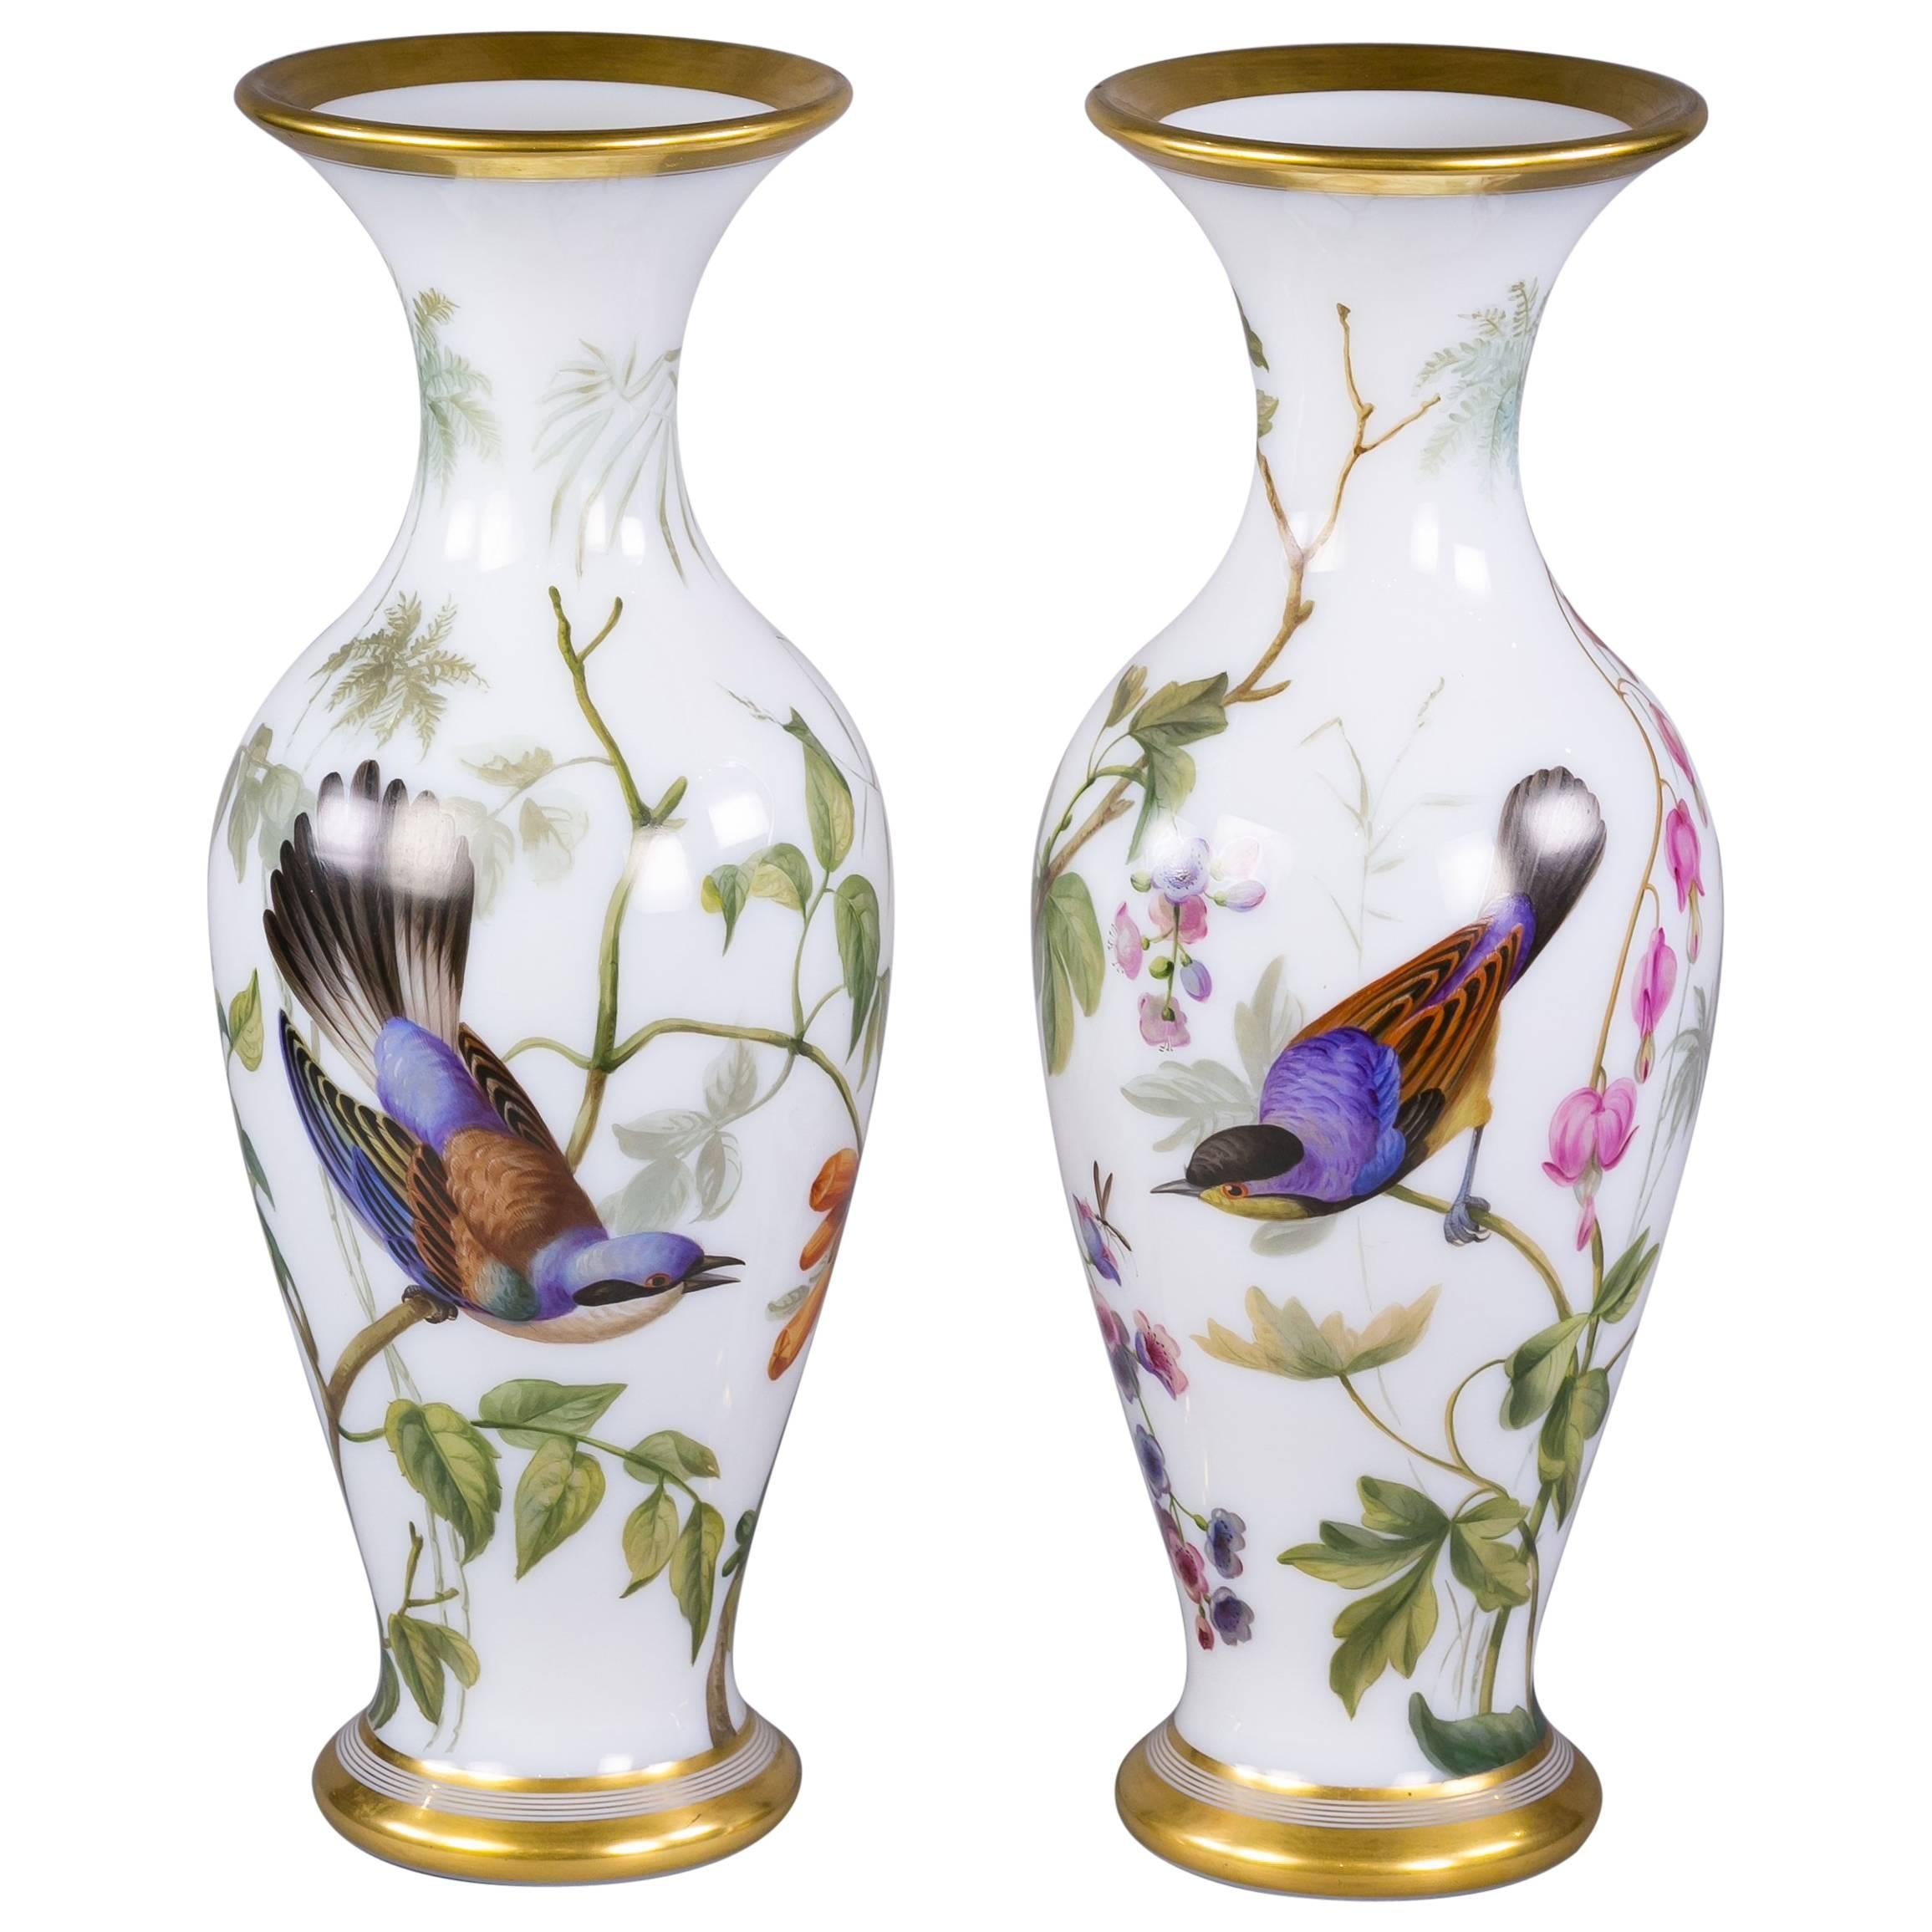 Pair of French Opaline Vases, Baccarat, circa 1835